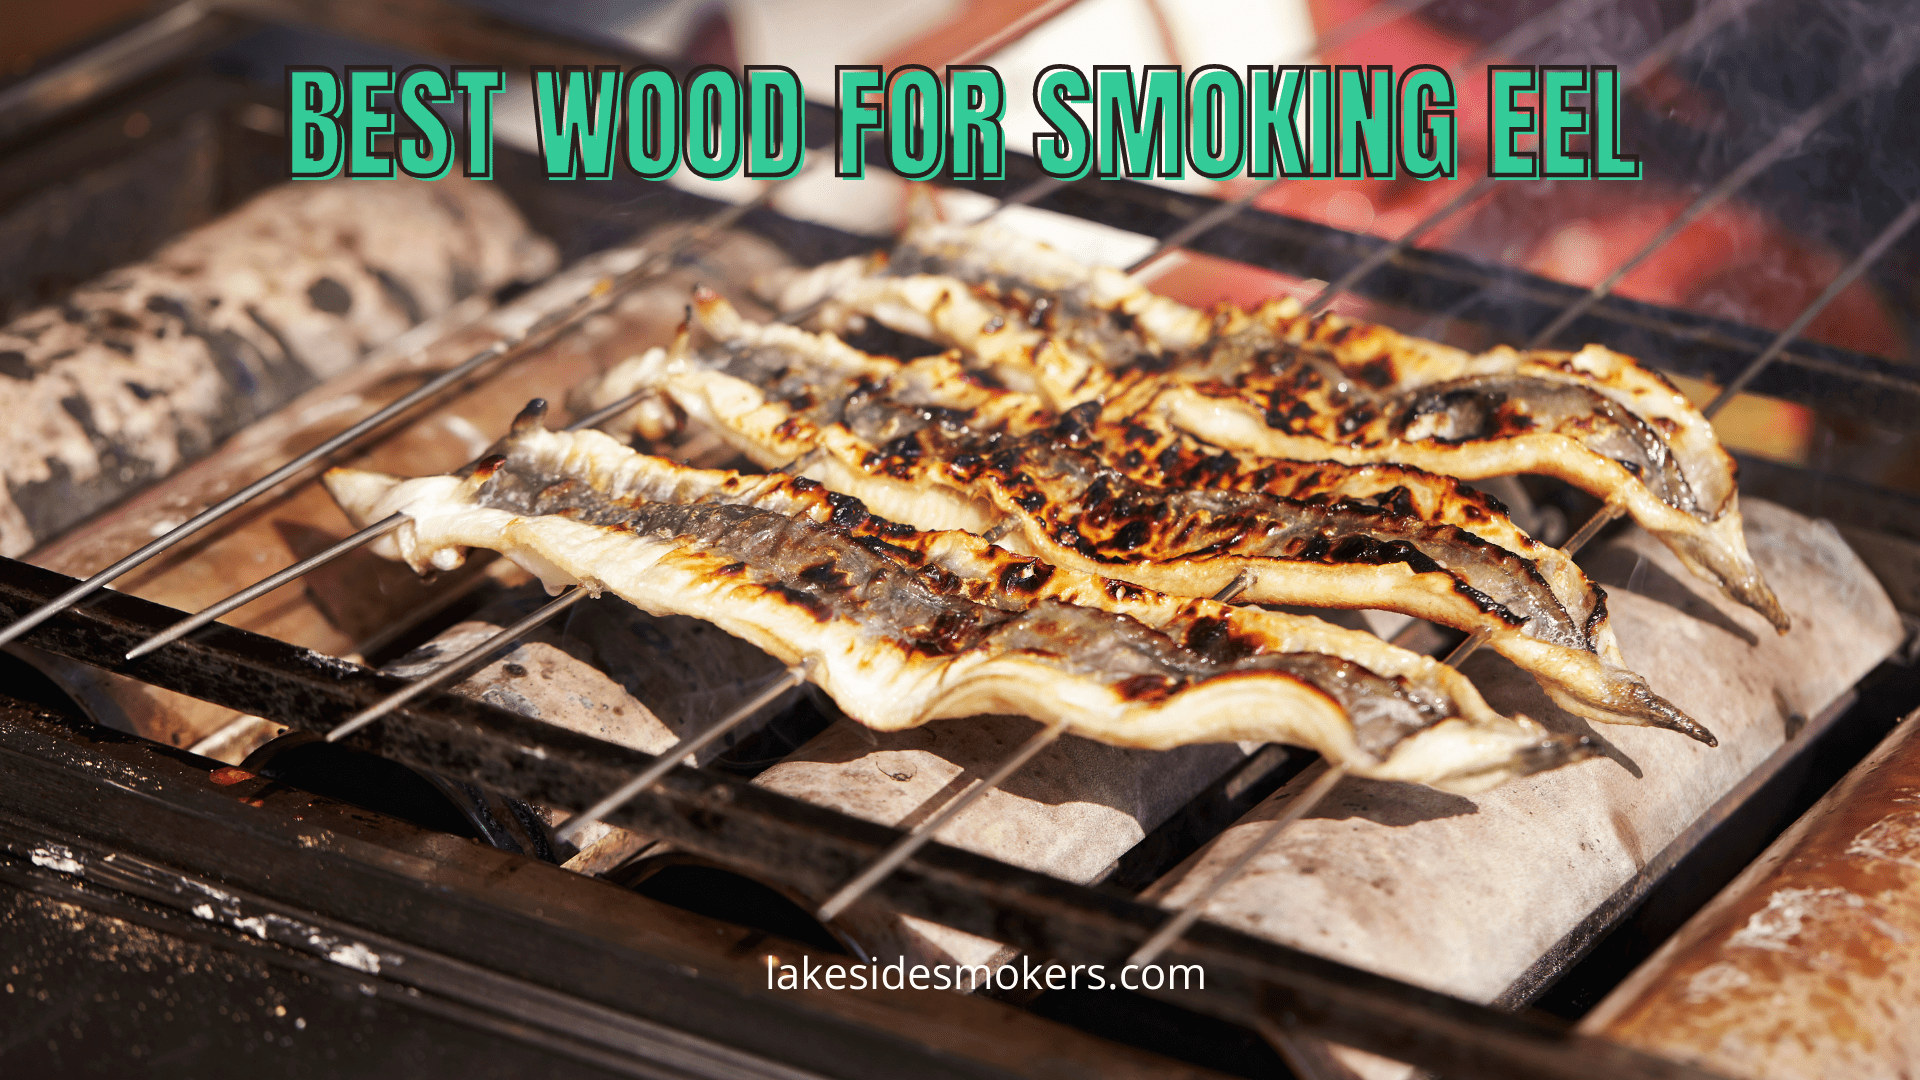 Best wood for smoking eel | How to get the best out of this tasty fish